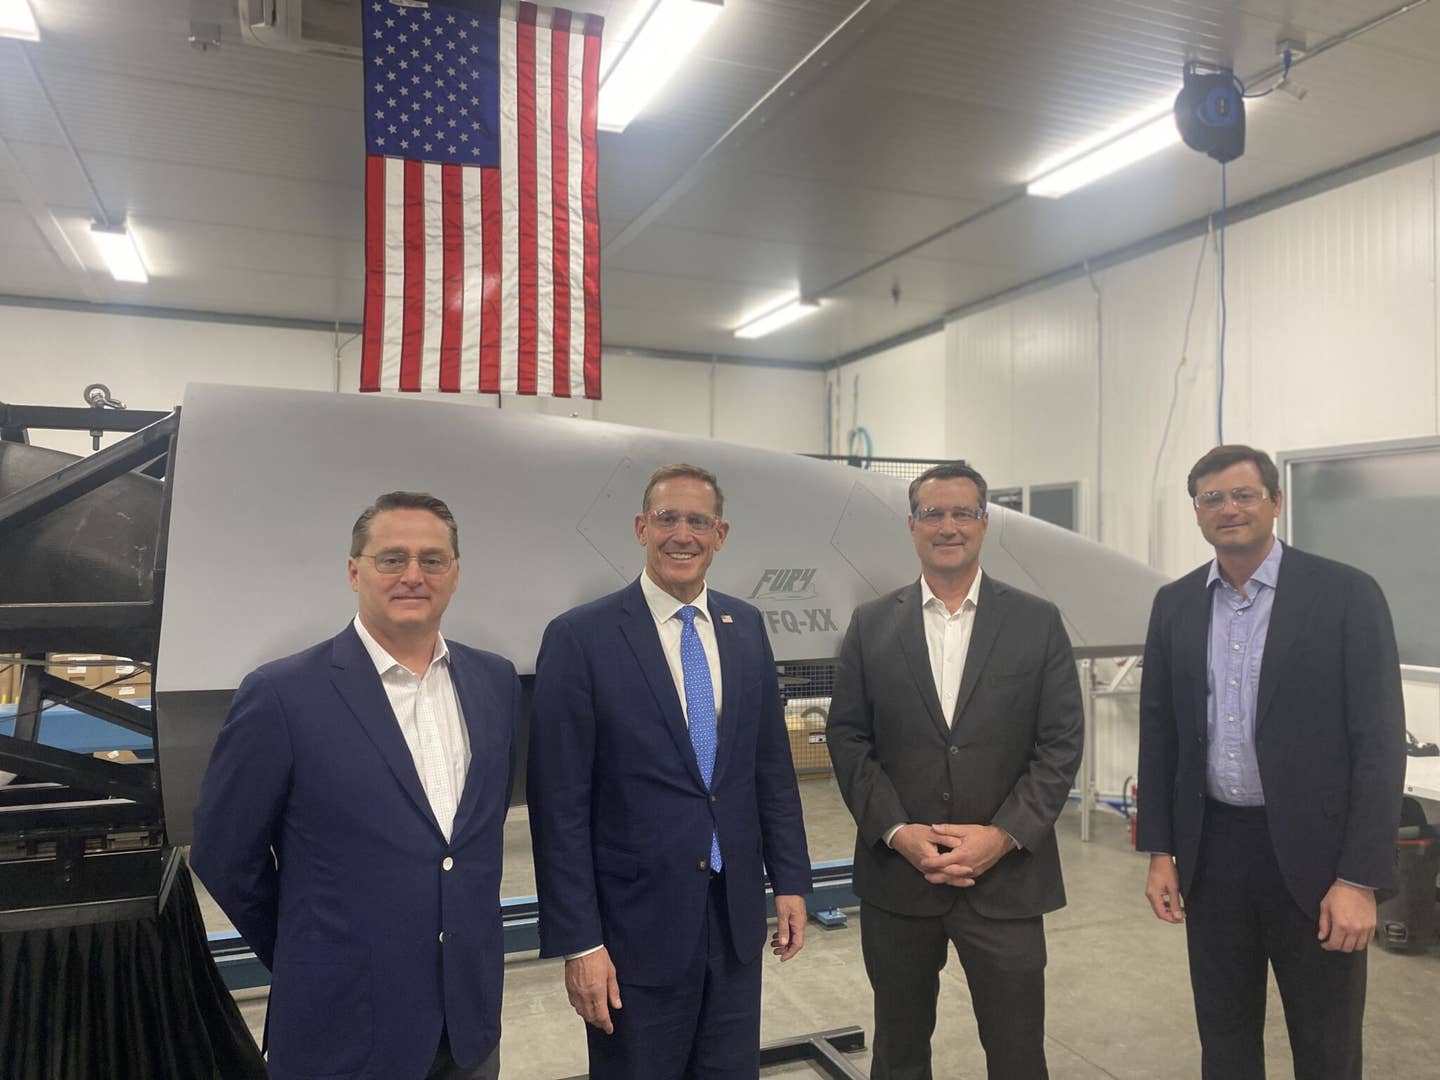 Scott Bledsoe, then president of Blue Force Technologies, second from the right, along with Senator Ted Budd, a North Carolina Republican, second from the left, and others, at one of the company's facilities earlier this year. <em>Scott Bledsoe/LinkedIn</em>